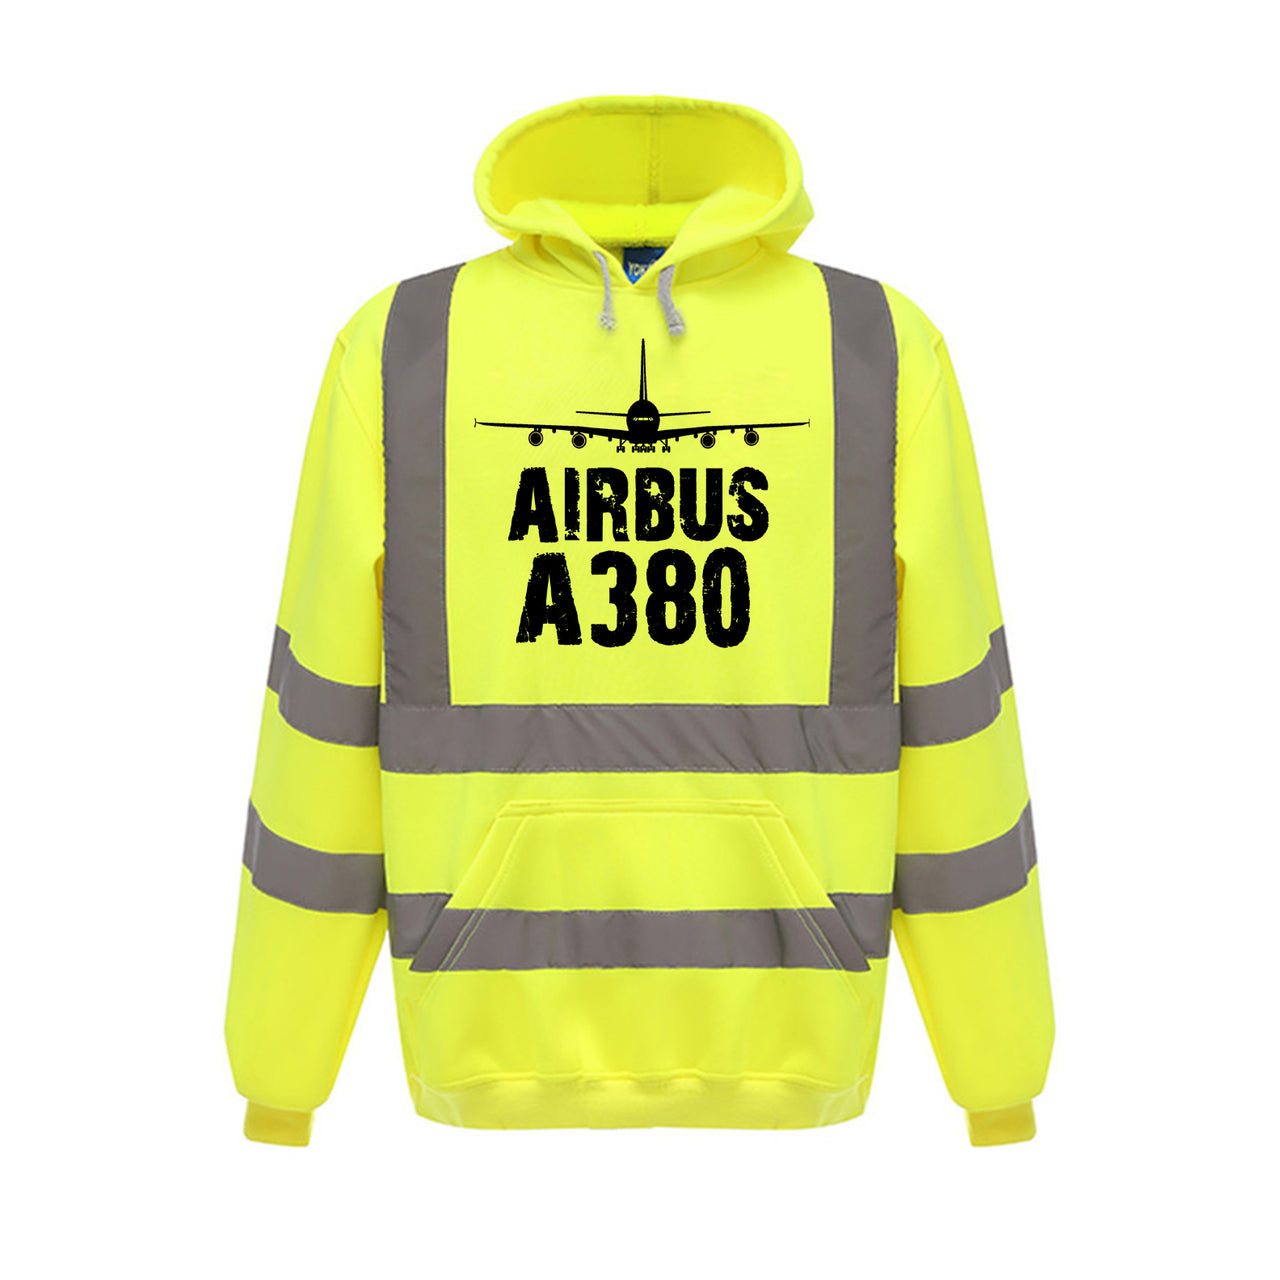 Airbus A380 & Plane Designed Reflective Hoodies